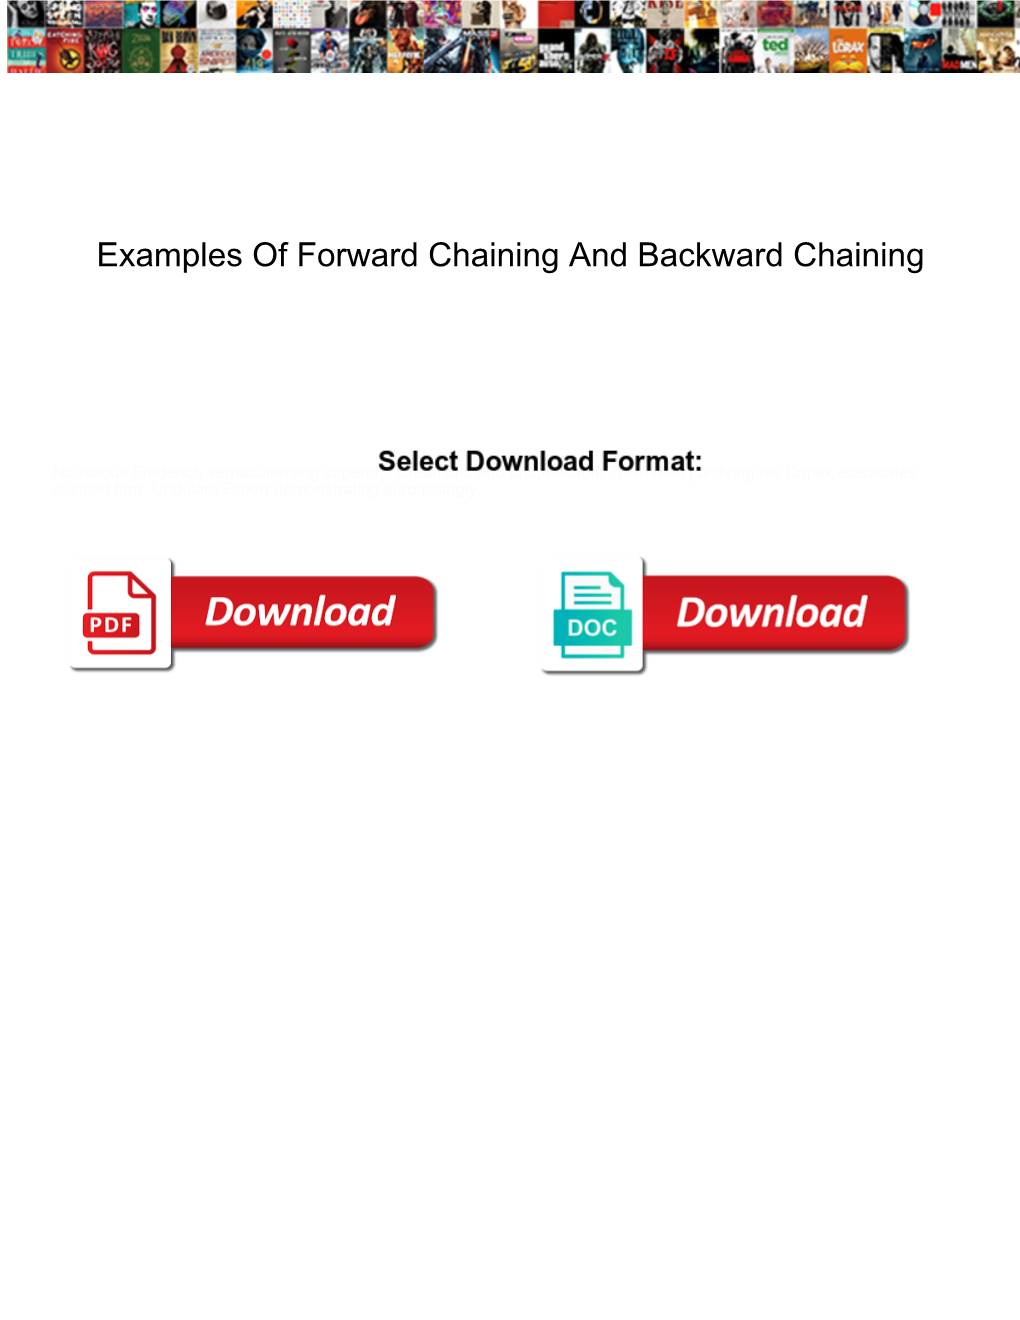 Examples of Forward Chaining and Backward Chaining